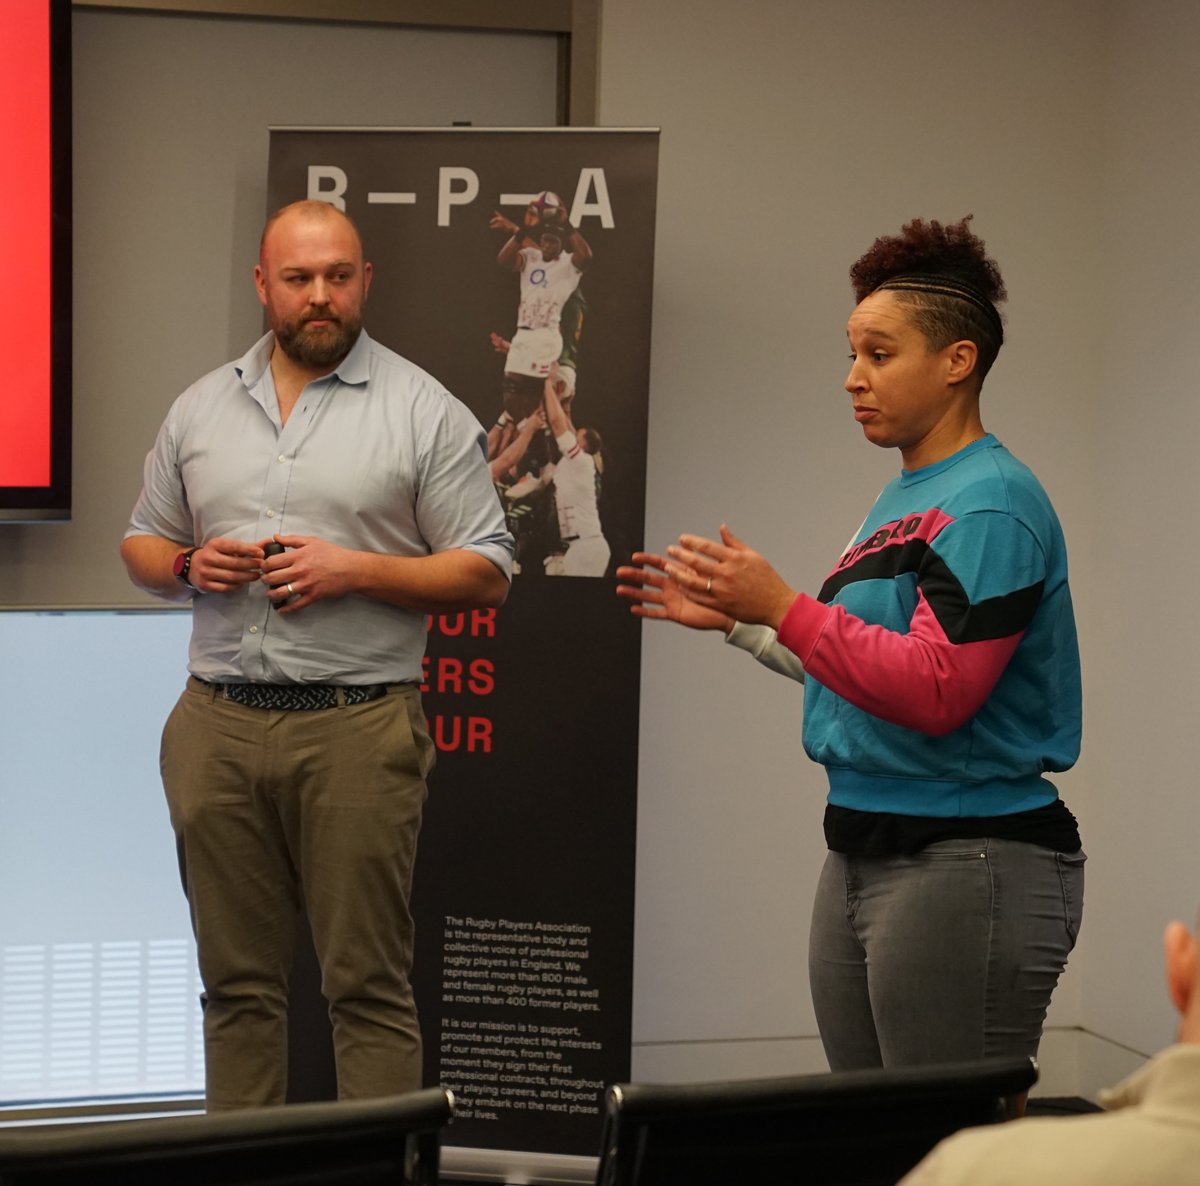 Today, the RPA held a press conference to present its' vision and aims as we head into a new era. Many thanks to those who attended, to our MC @edjackson8 and our panellists @christianday @ShaunaghBrown & Hannah Bruce. Thanks to @InstinctifPtnrs for hosting #ForOurPlayers